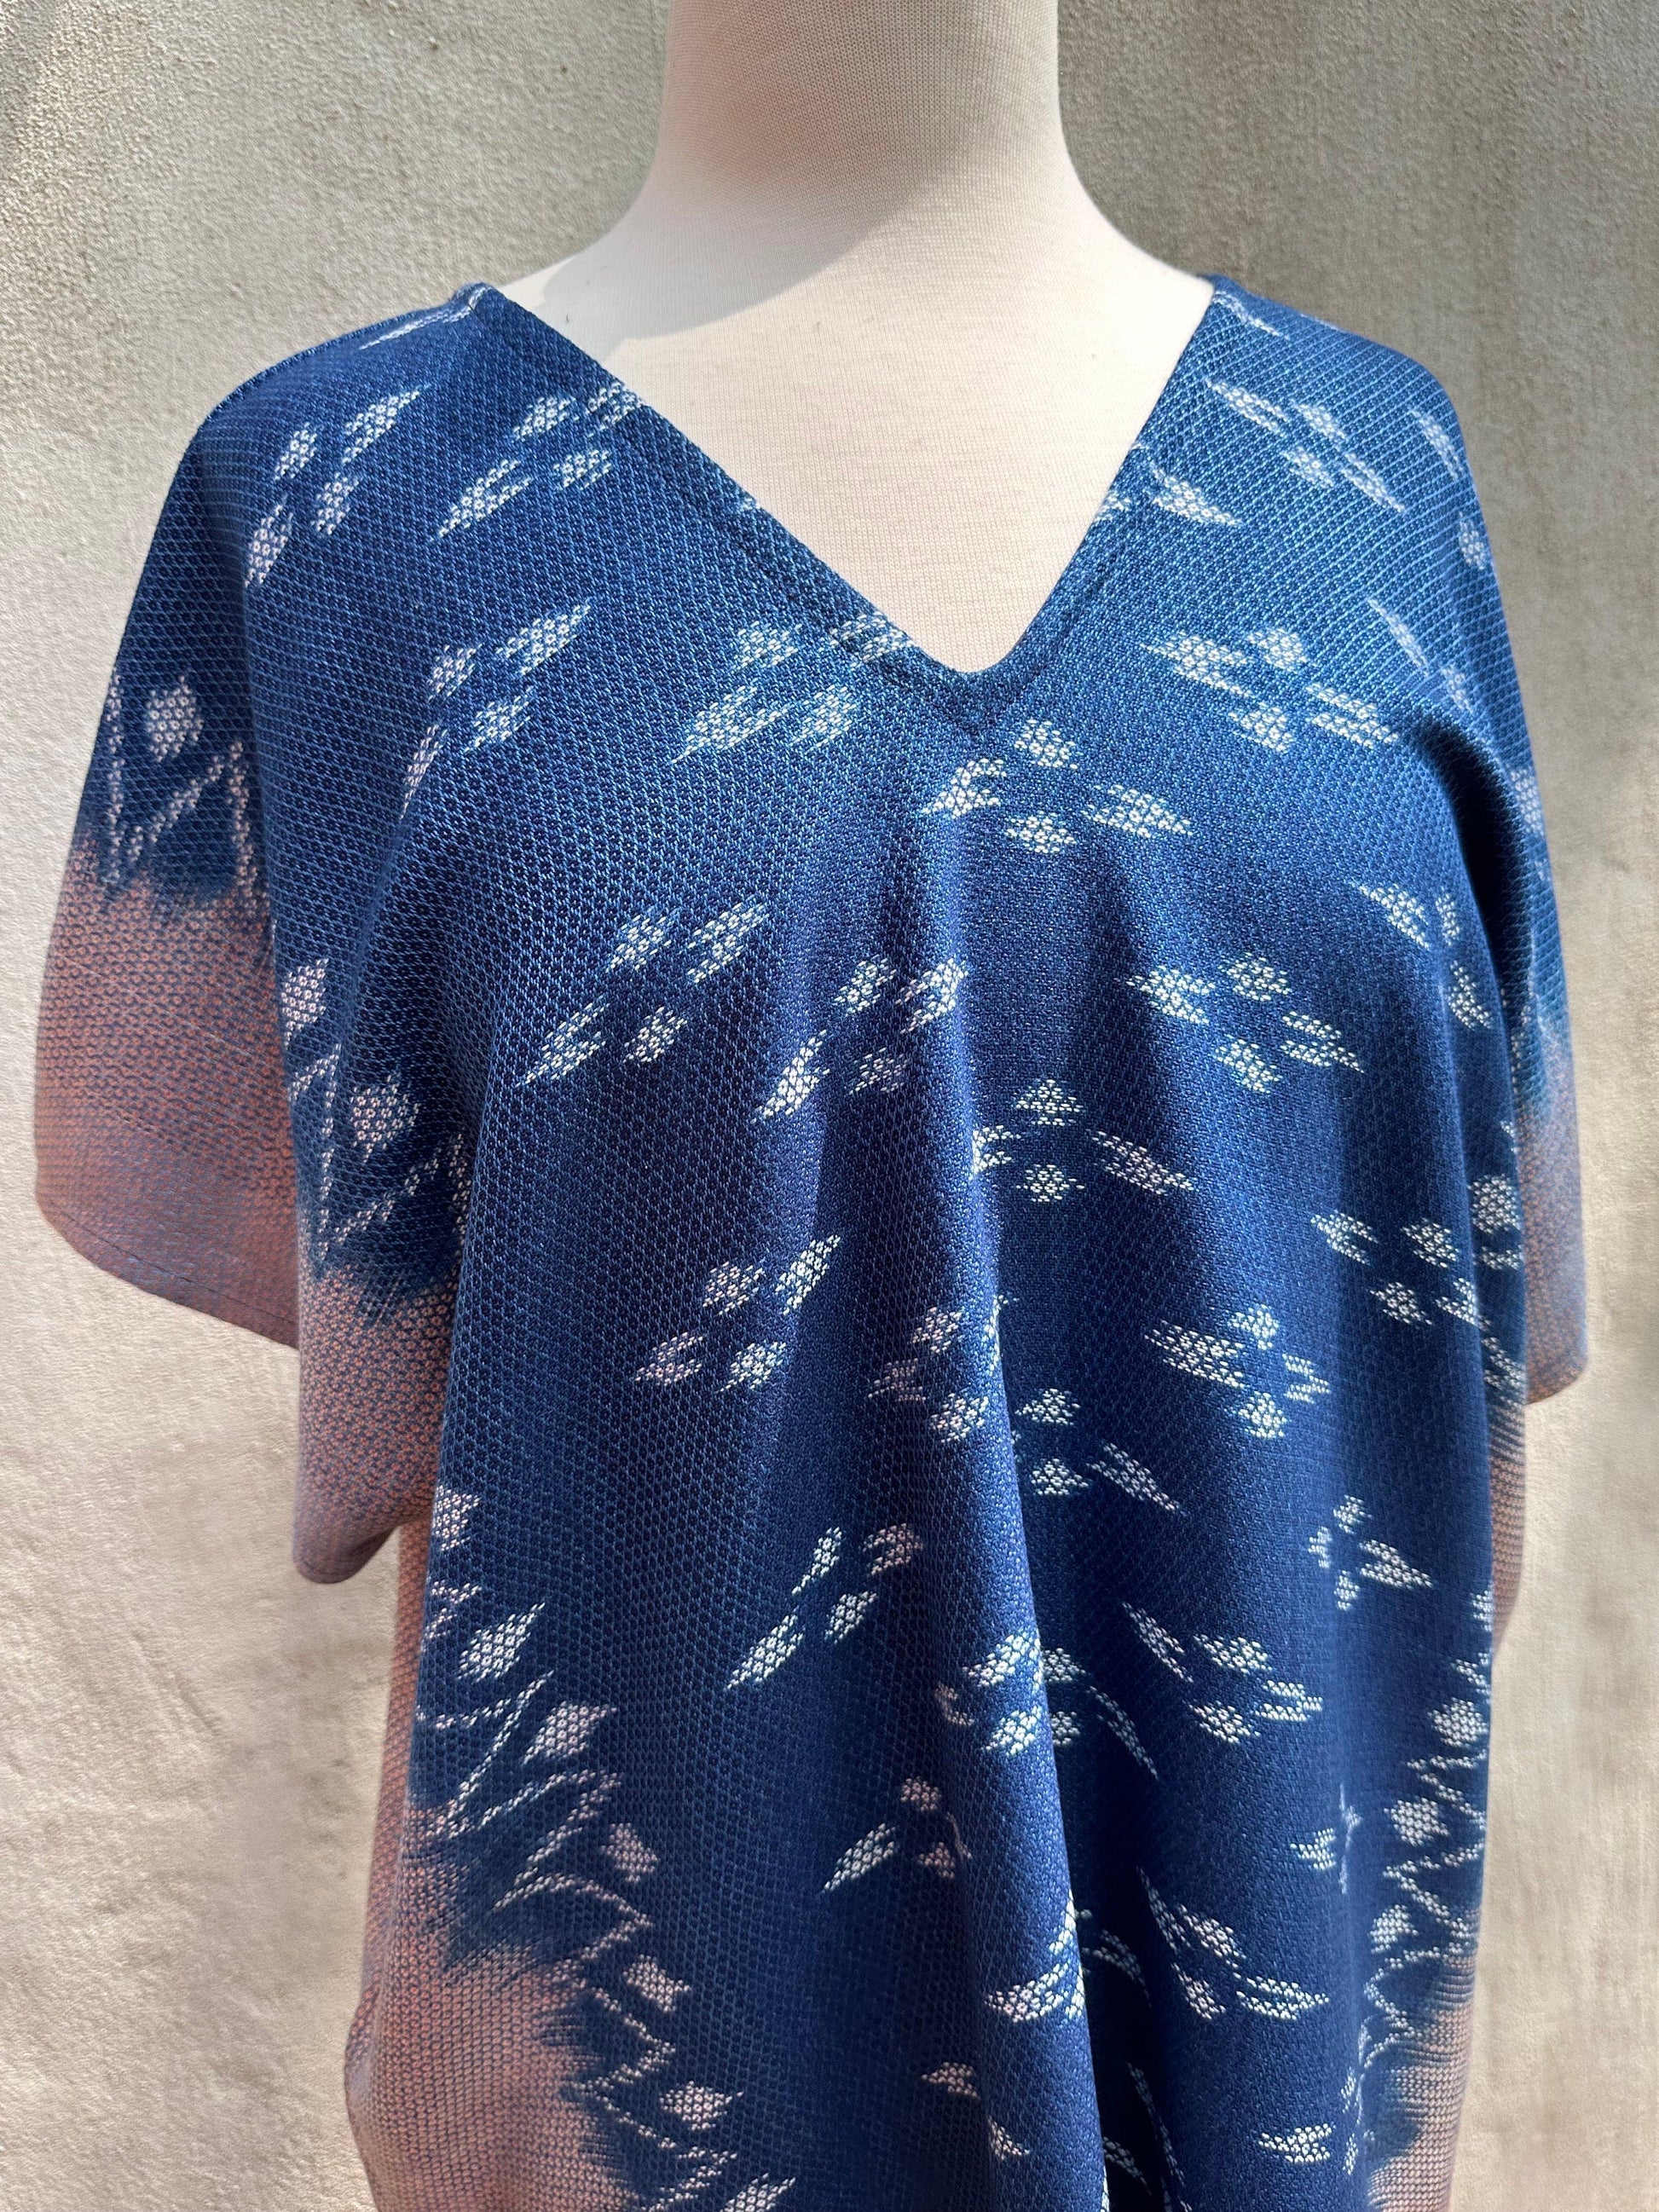 MALA handworks  Ikat Hand Woven Pattern Kaftan in Indigo Blue with Light Pink and White